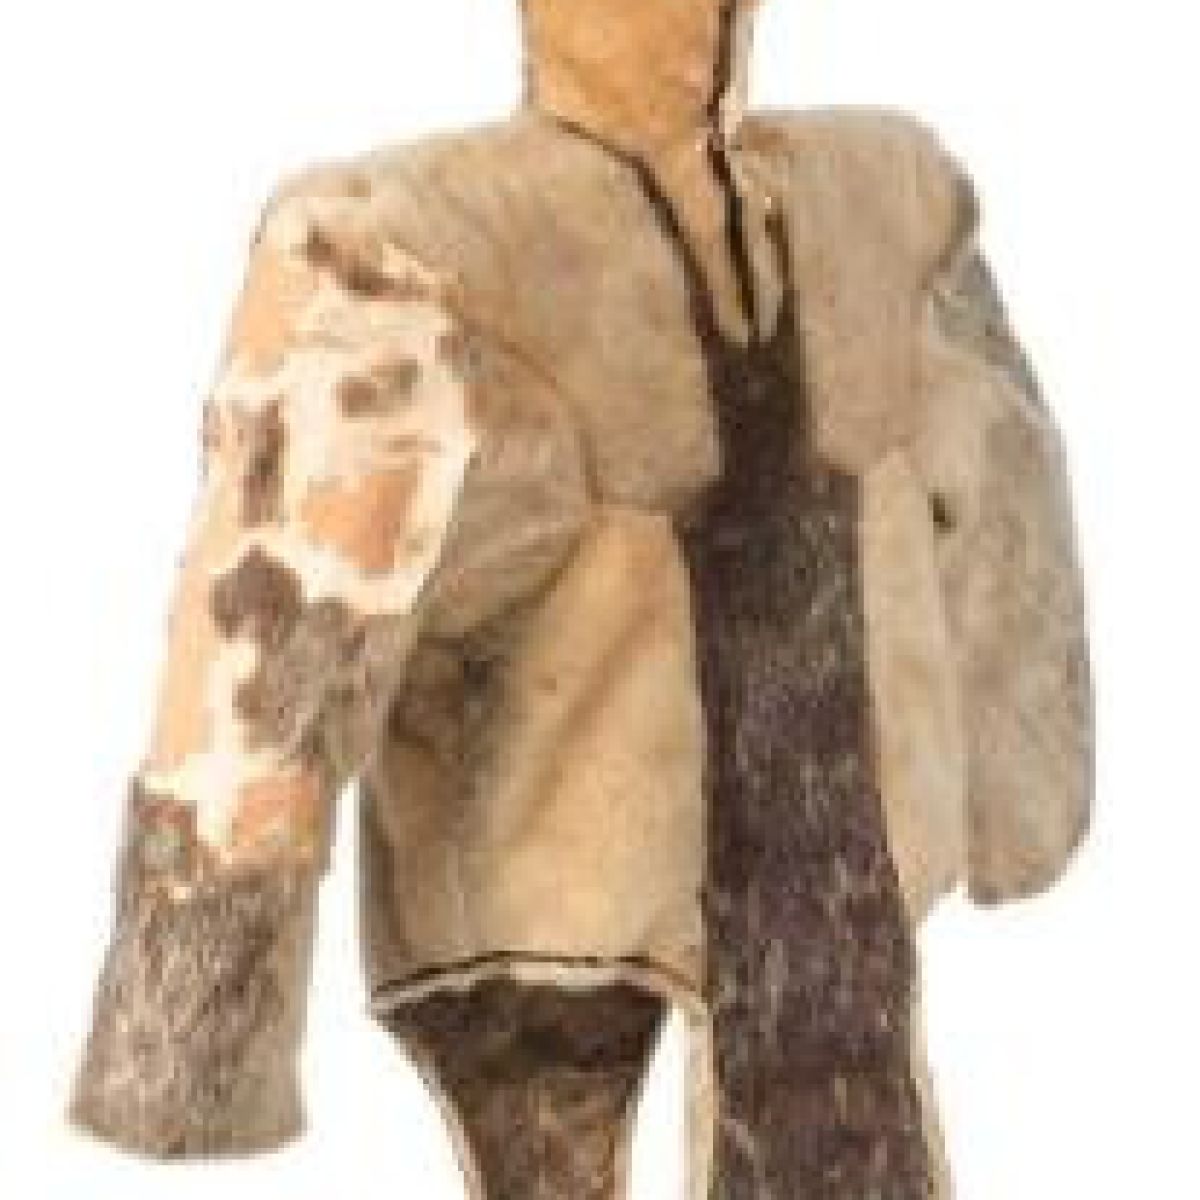 Woman’S Parka From Qilakitsoq Dated To Ad 1475  From Greenland National Museum Archives